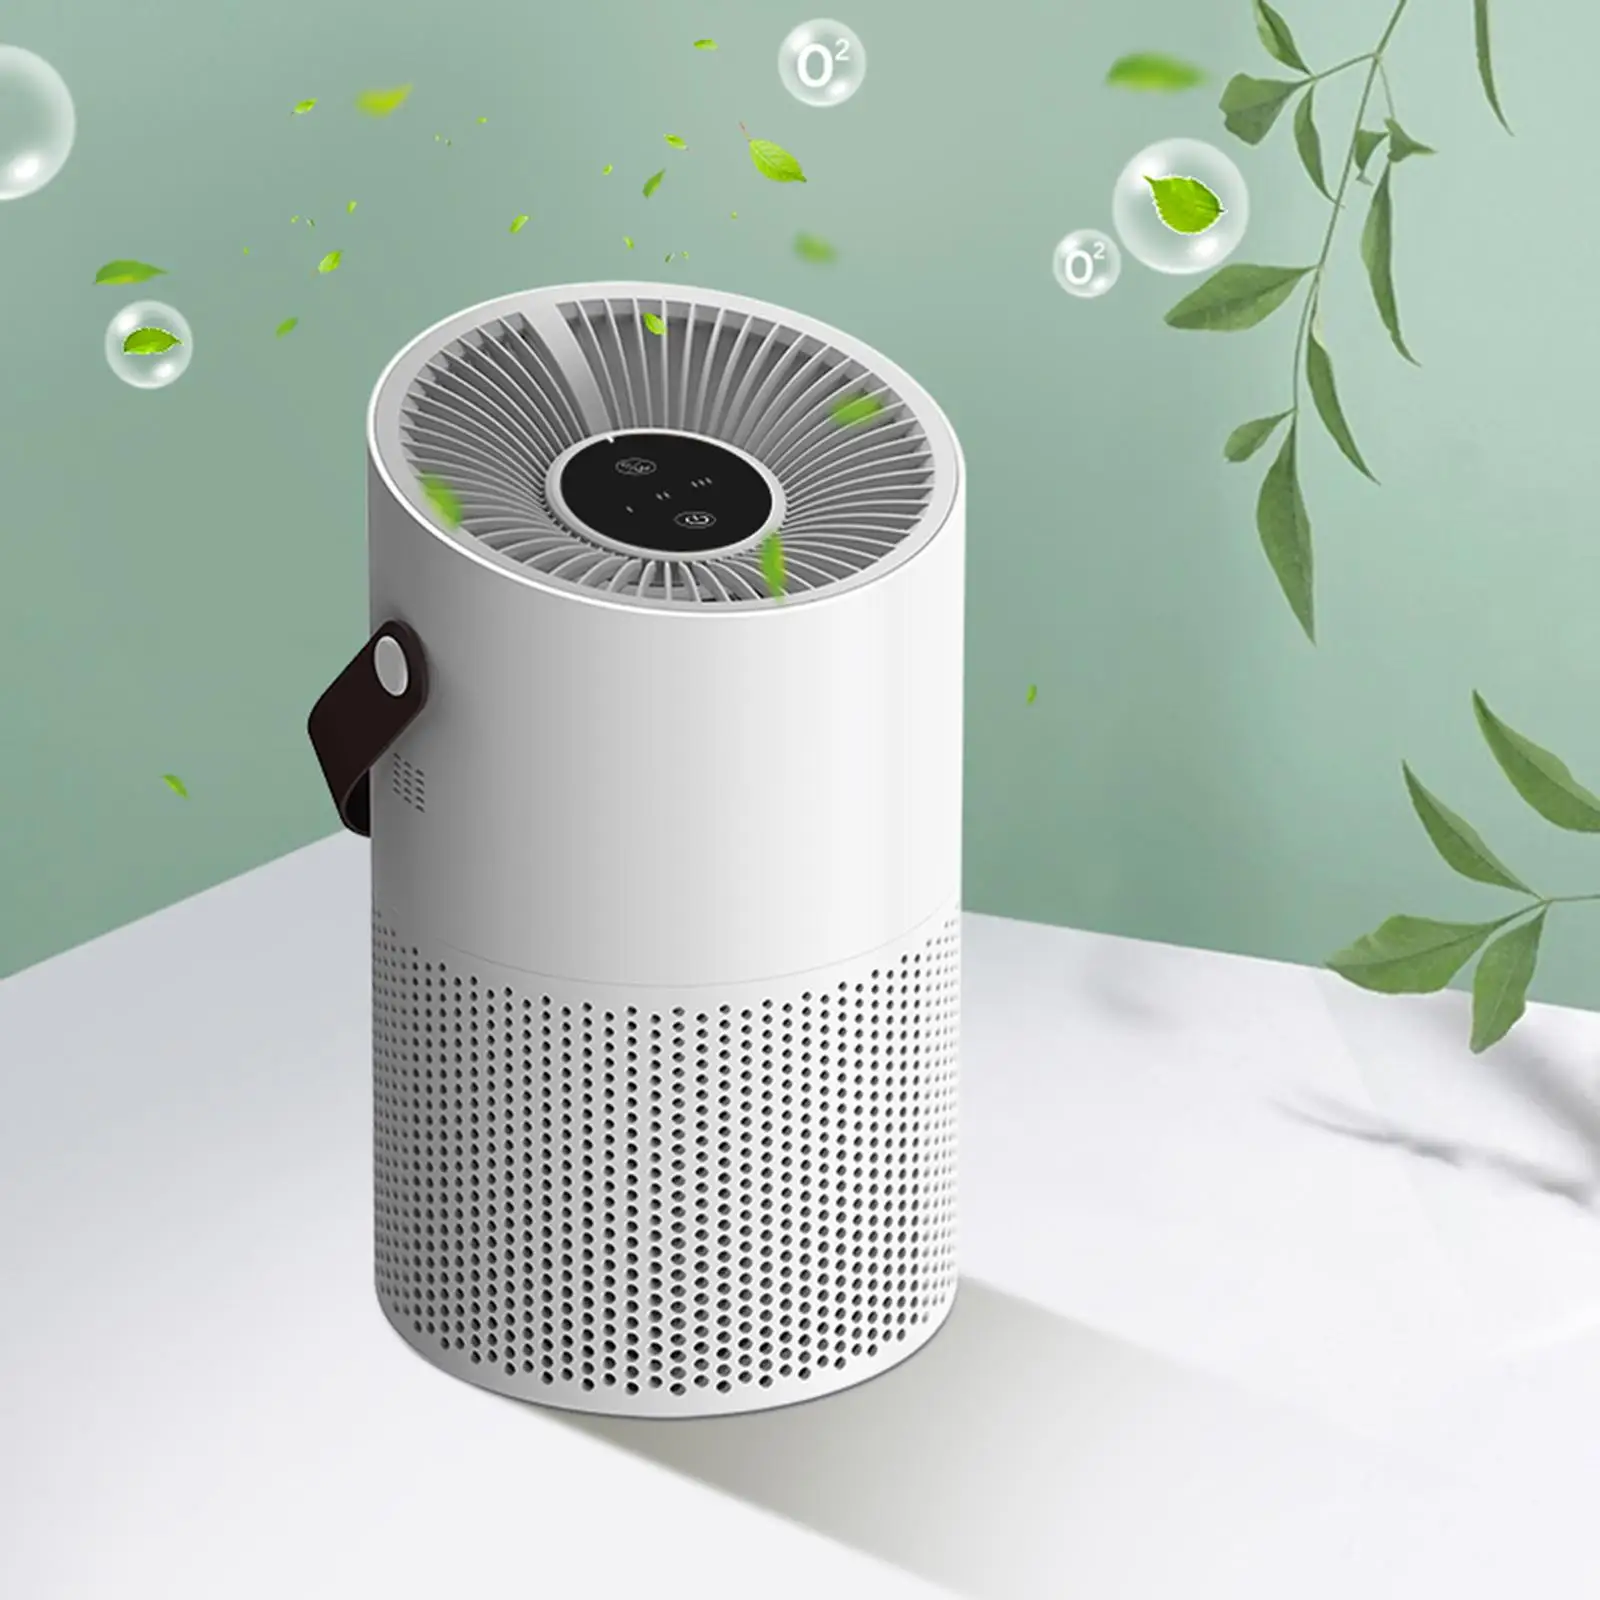 Portable Desktop Air Purifiers 4 Layer Filter Powereful 3 Gears Wind Cleaner for Hotels Home Office Pollen Smoke